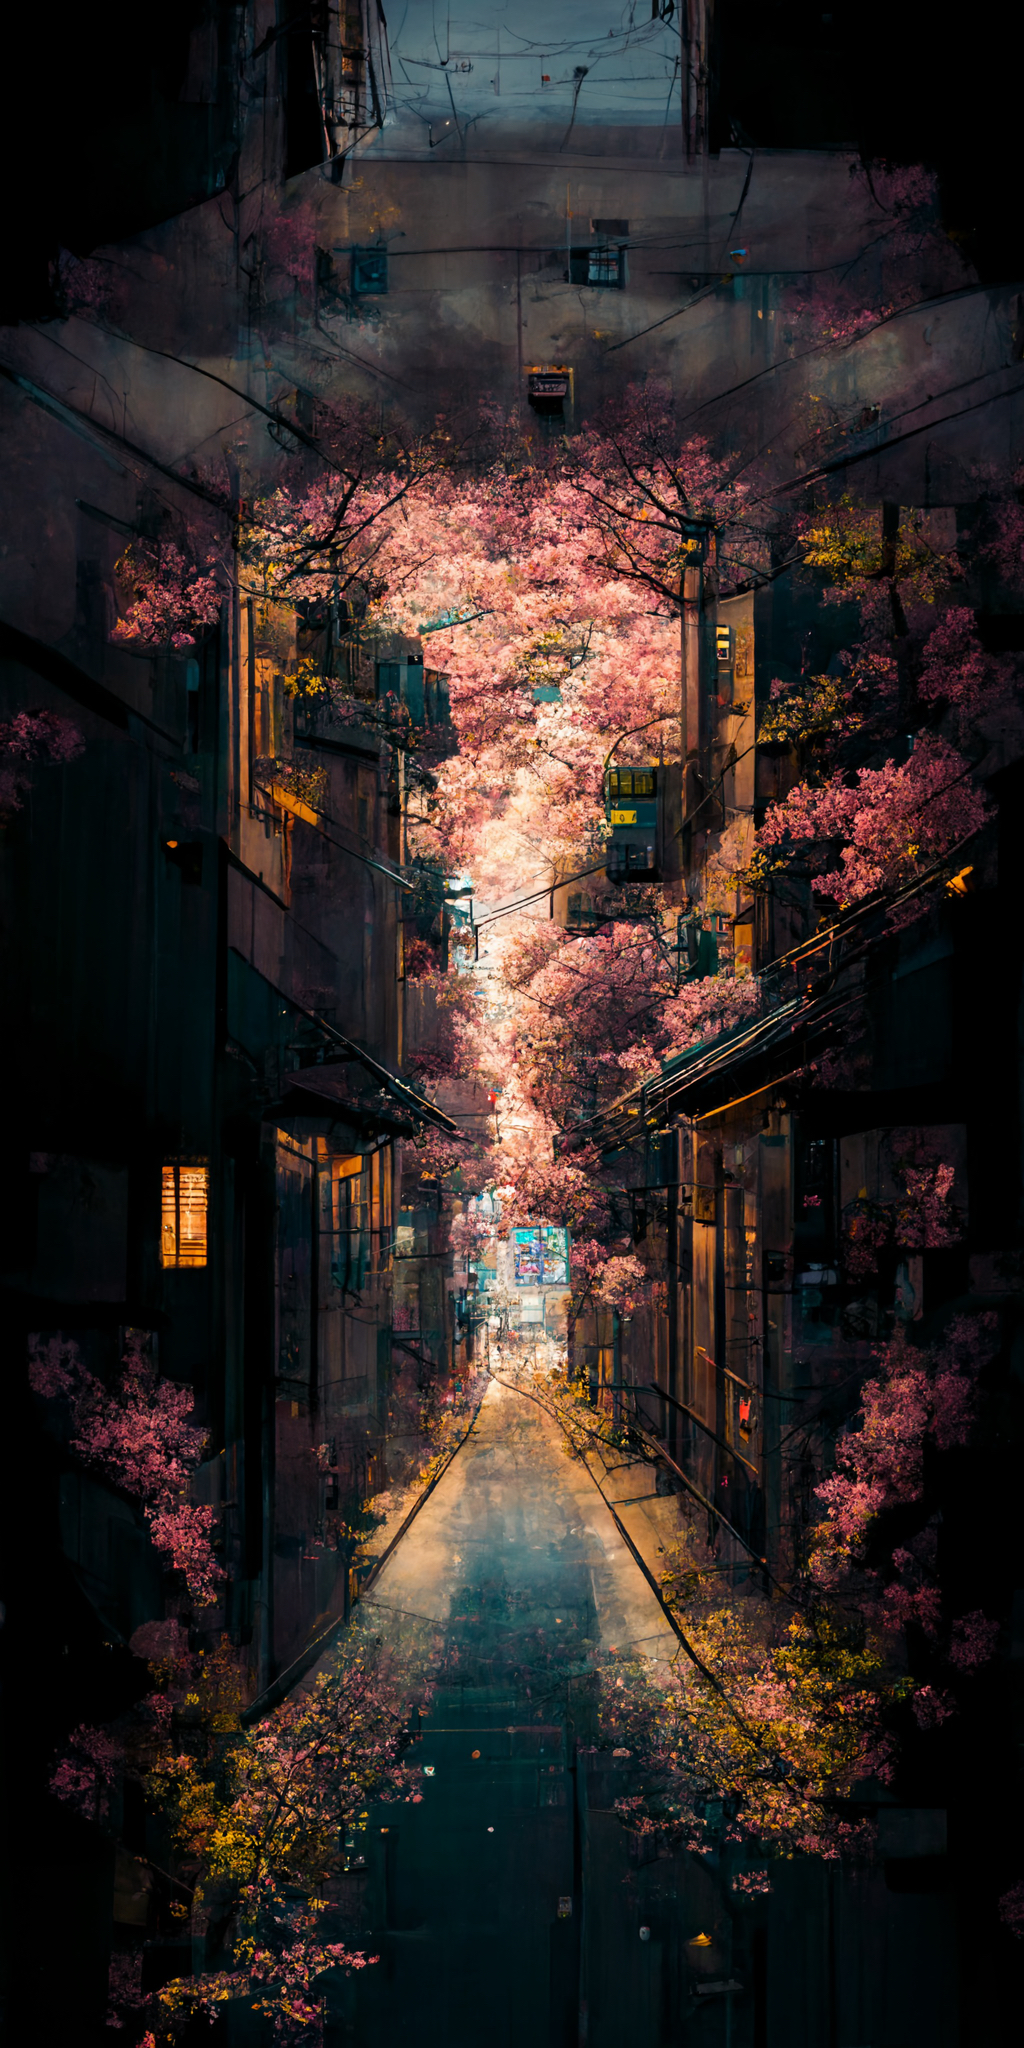 Bluewing_an_alley_in_Tokyo_with_cherry_blossoms_Sony_a7_III_Top_40fe18ed-4c1f-46d0-8dc9-0e0e18457e17.jpeg